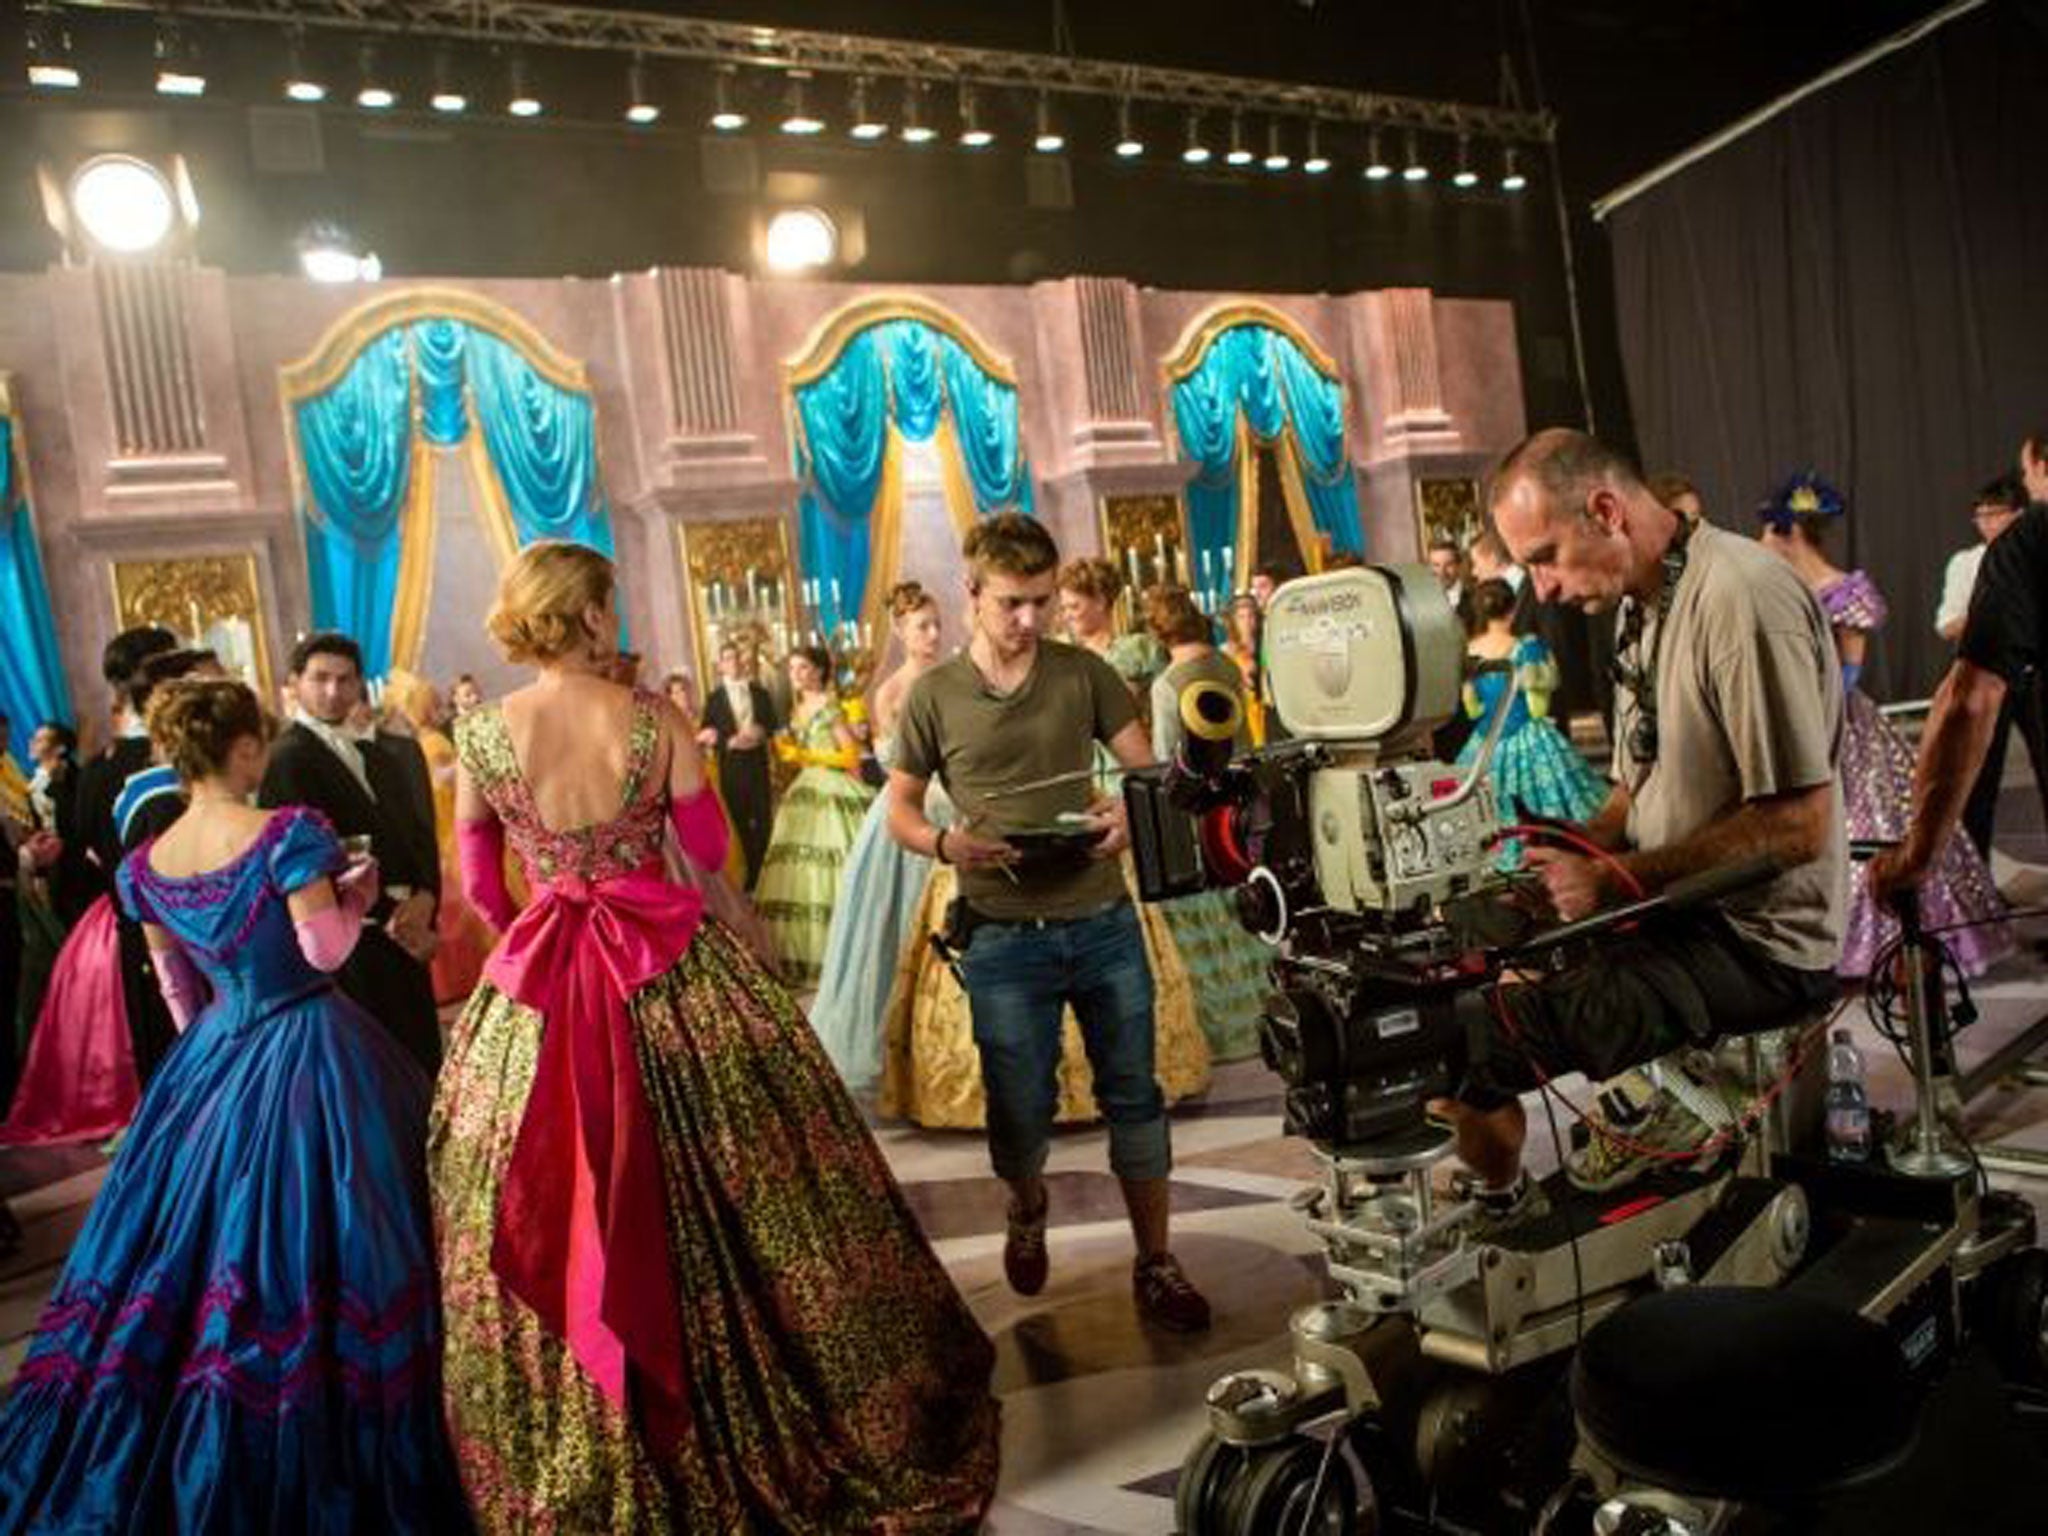 Over 80 extras were used for the ballroom scene